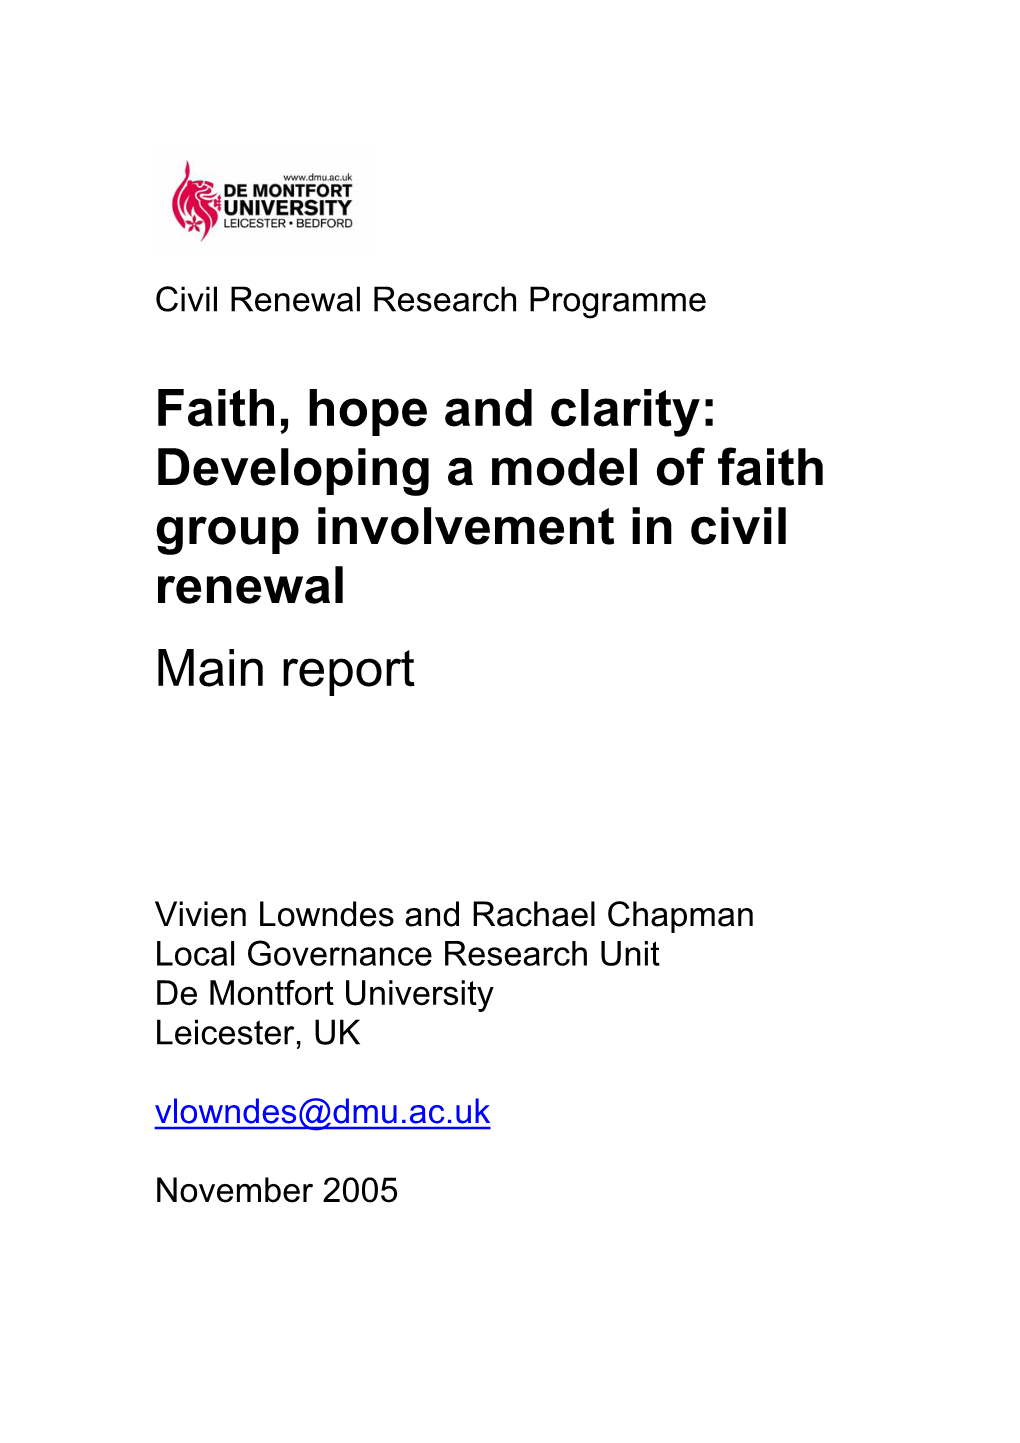 Faith, Hope and Clarity: Developing a Model of Faith Group Involvement in Civil Renewal